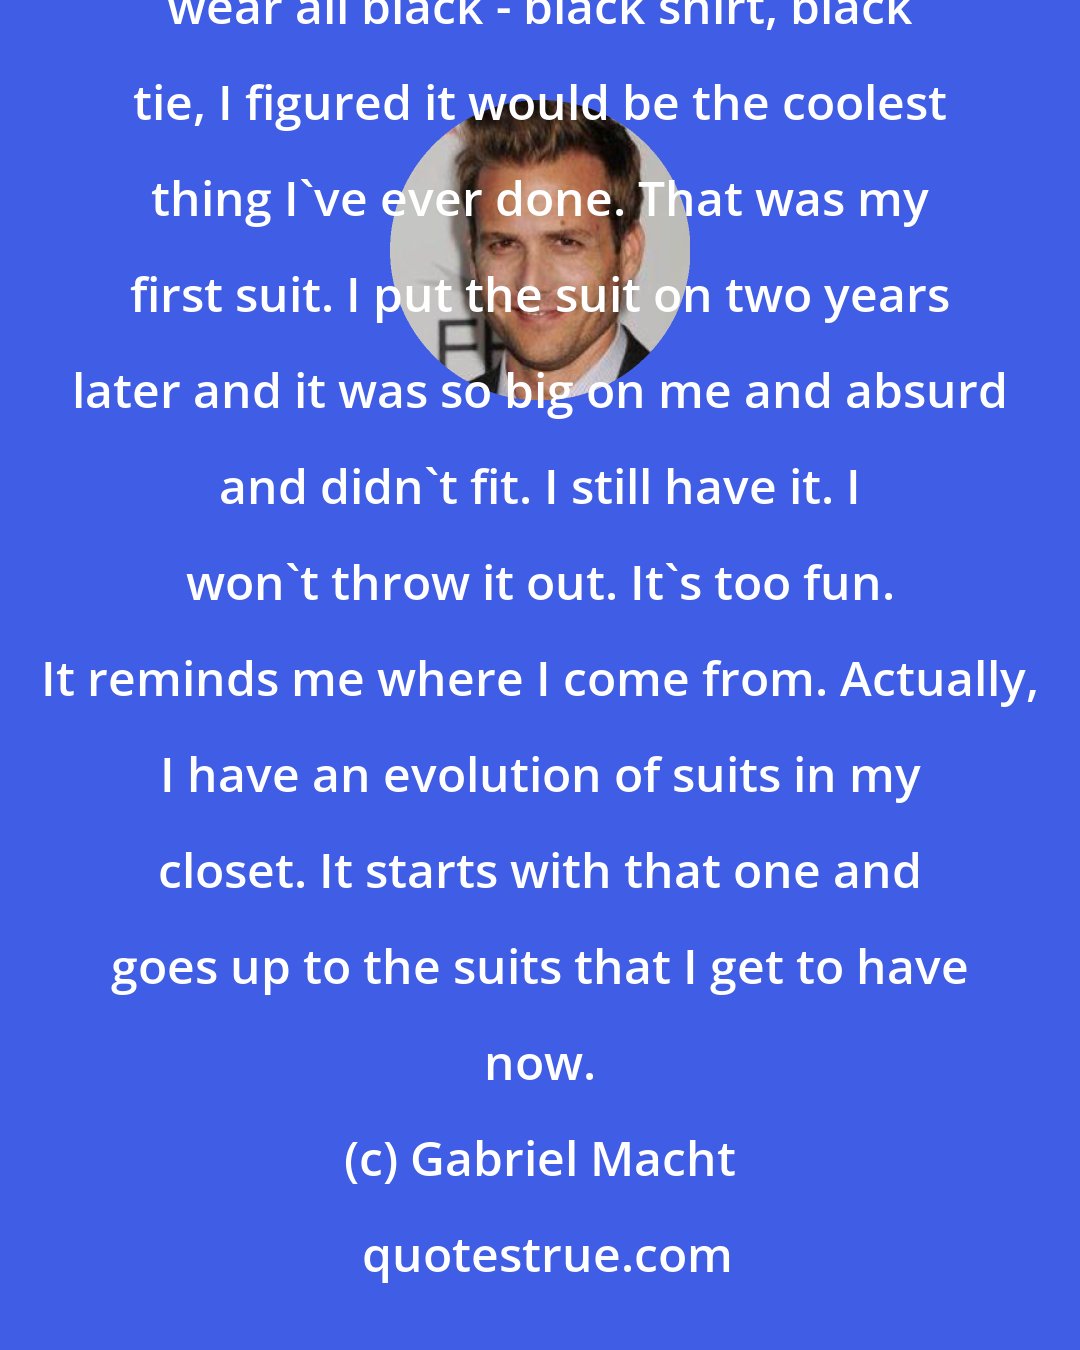 Gabriel Macht: For my prom, I was so fancy, I got t a suit tailored. I wanted a three-piece suit. I thought it would be cool to wear all black - black shirt, black tie, I figured it would be the coolest thing I've ever done. That was my first suit. I put the suit on two years later and it was so big on me and absurd and didn't fit. I still have it. I won't throw it out. It's too fun. It reminds me where I come from. Actually, I have an evolution of suits in my closet. It starts with that one and goes up to the suits that I get to have now.